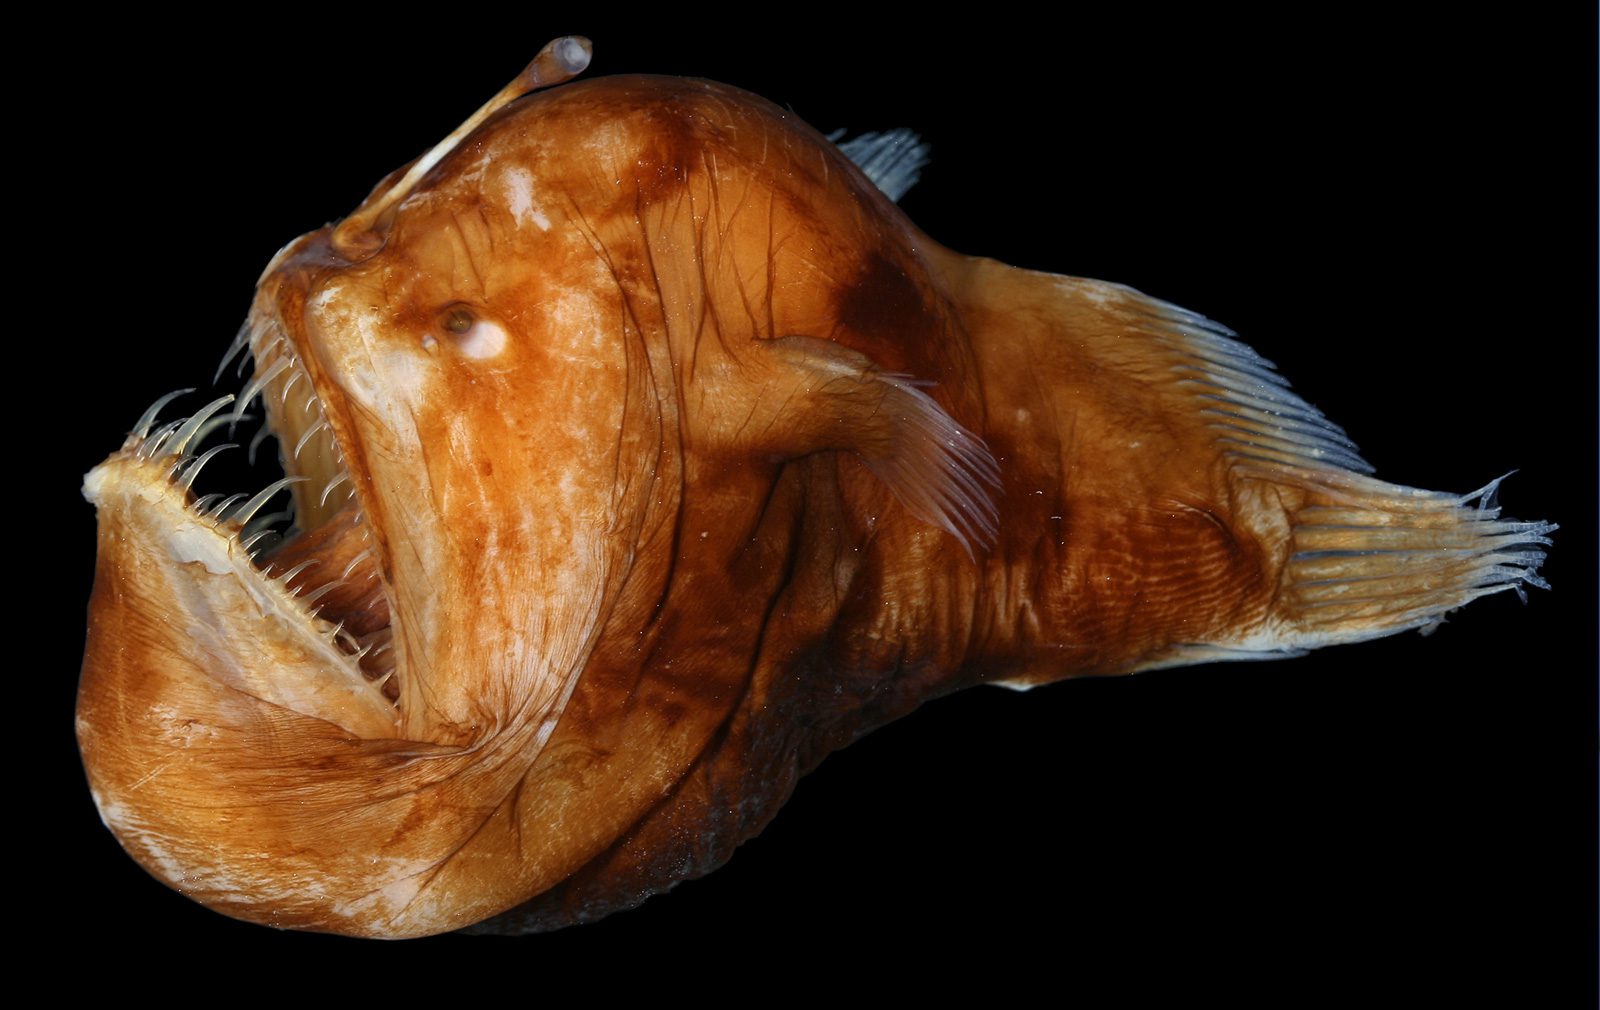 Anglerfish can devour large prey